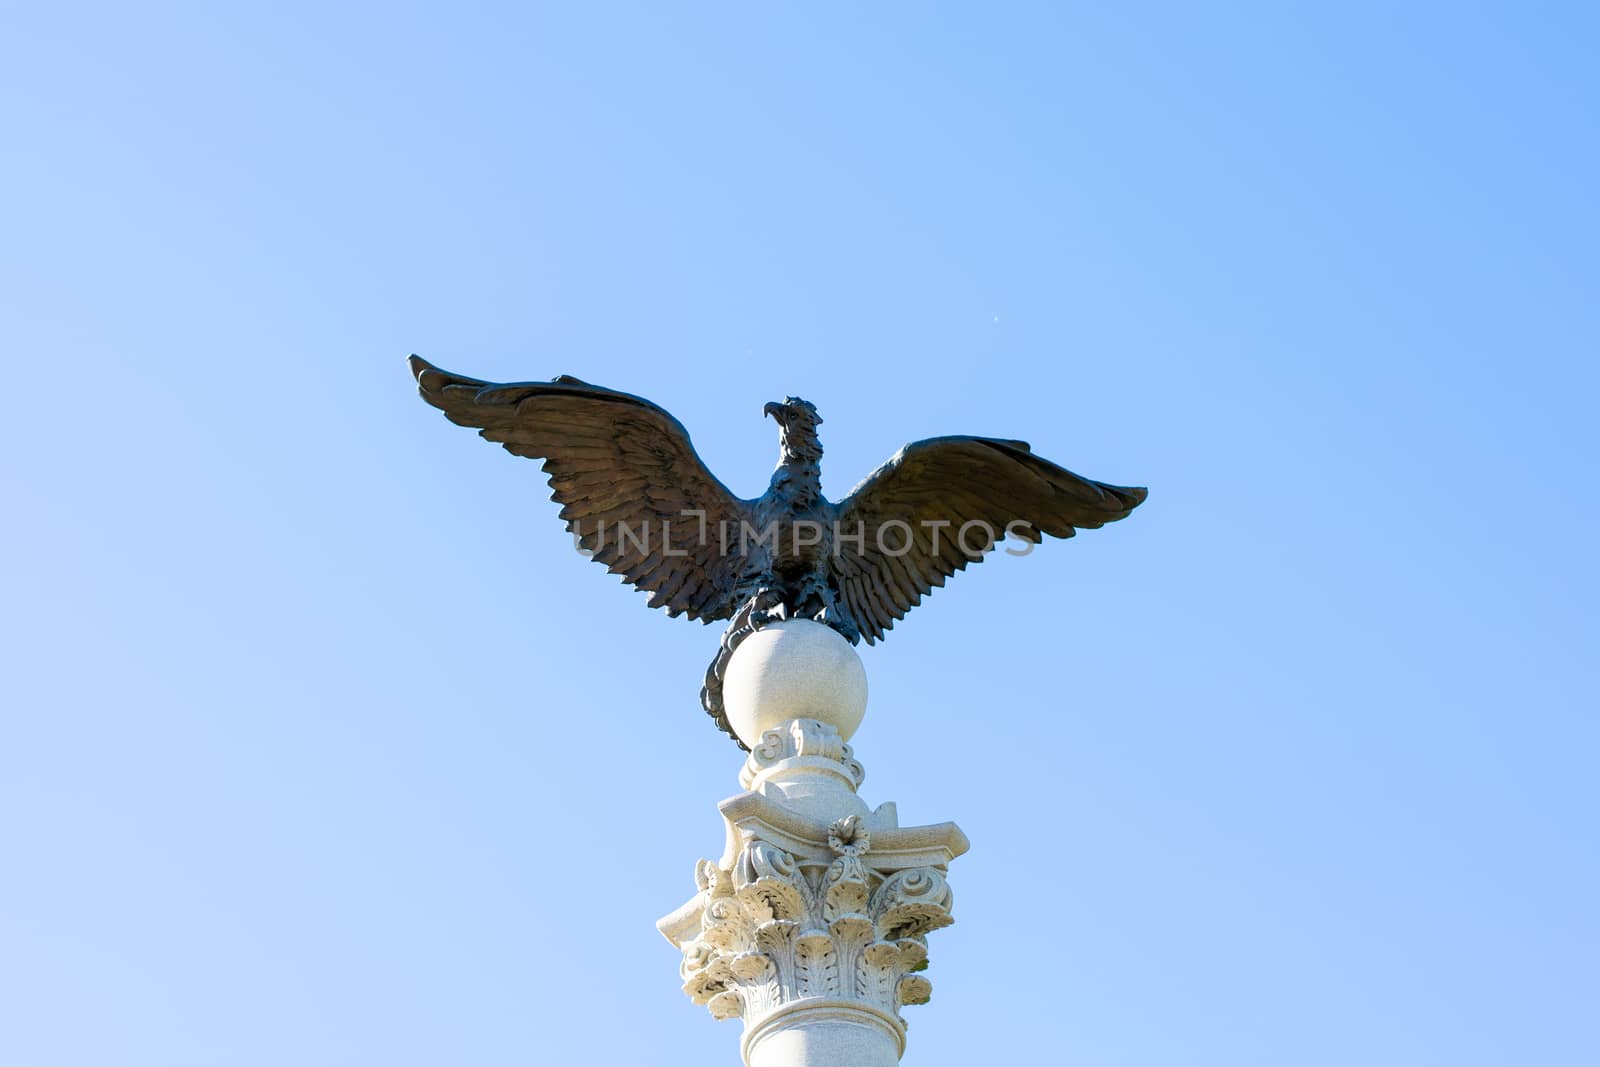 The Bird on Top of one of the Pennsylvania Columns in Valley For by bju12290